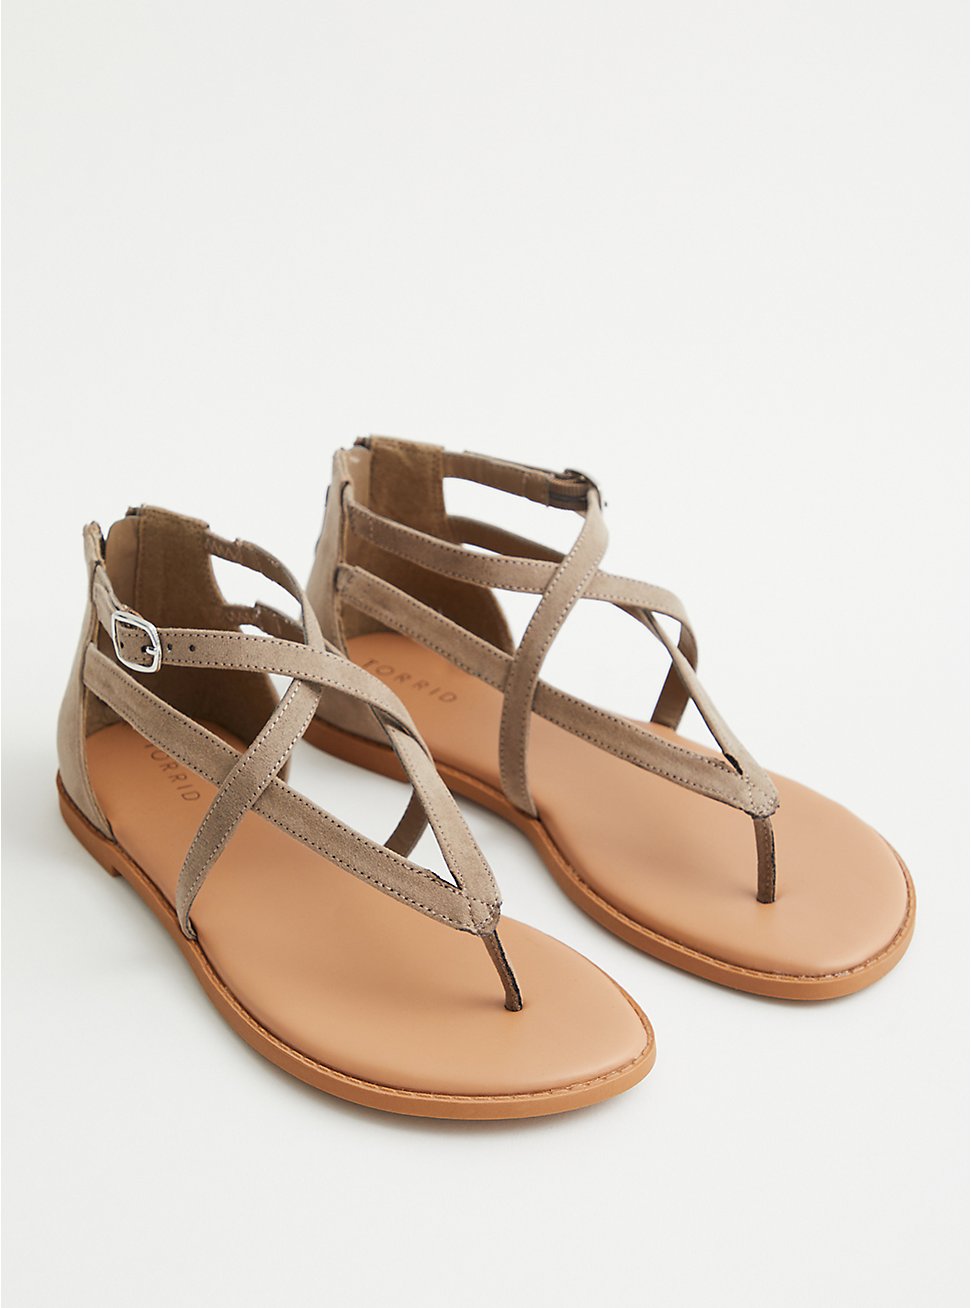 T-Strap Sandal - Faux Suede Taupe (WW), TAUPE, hi-res